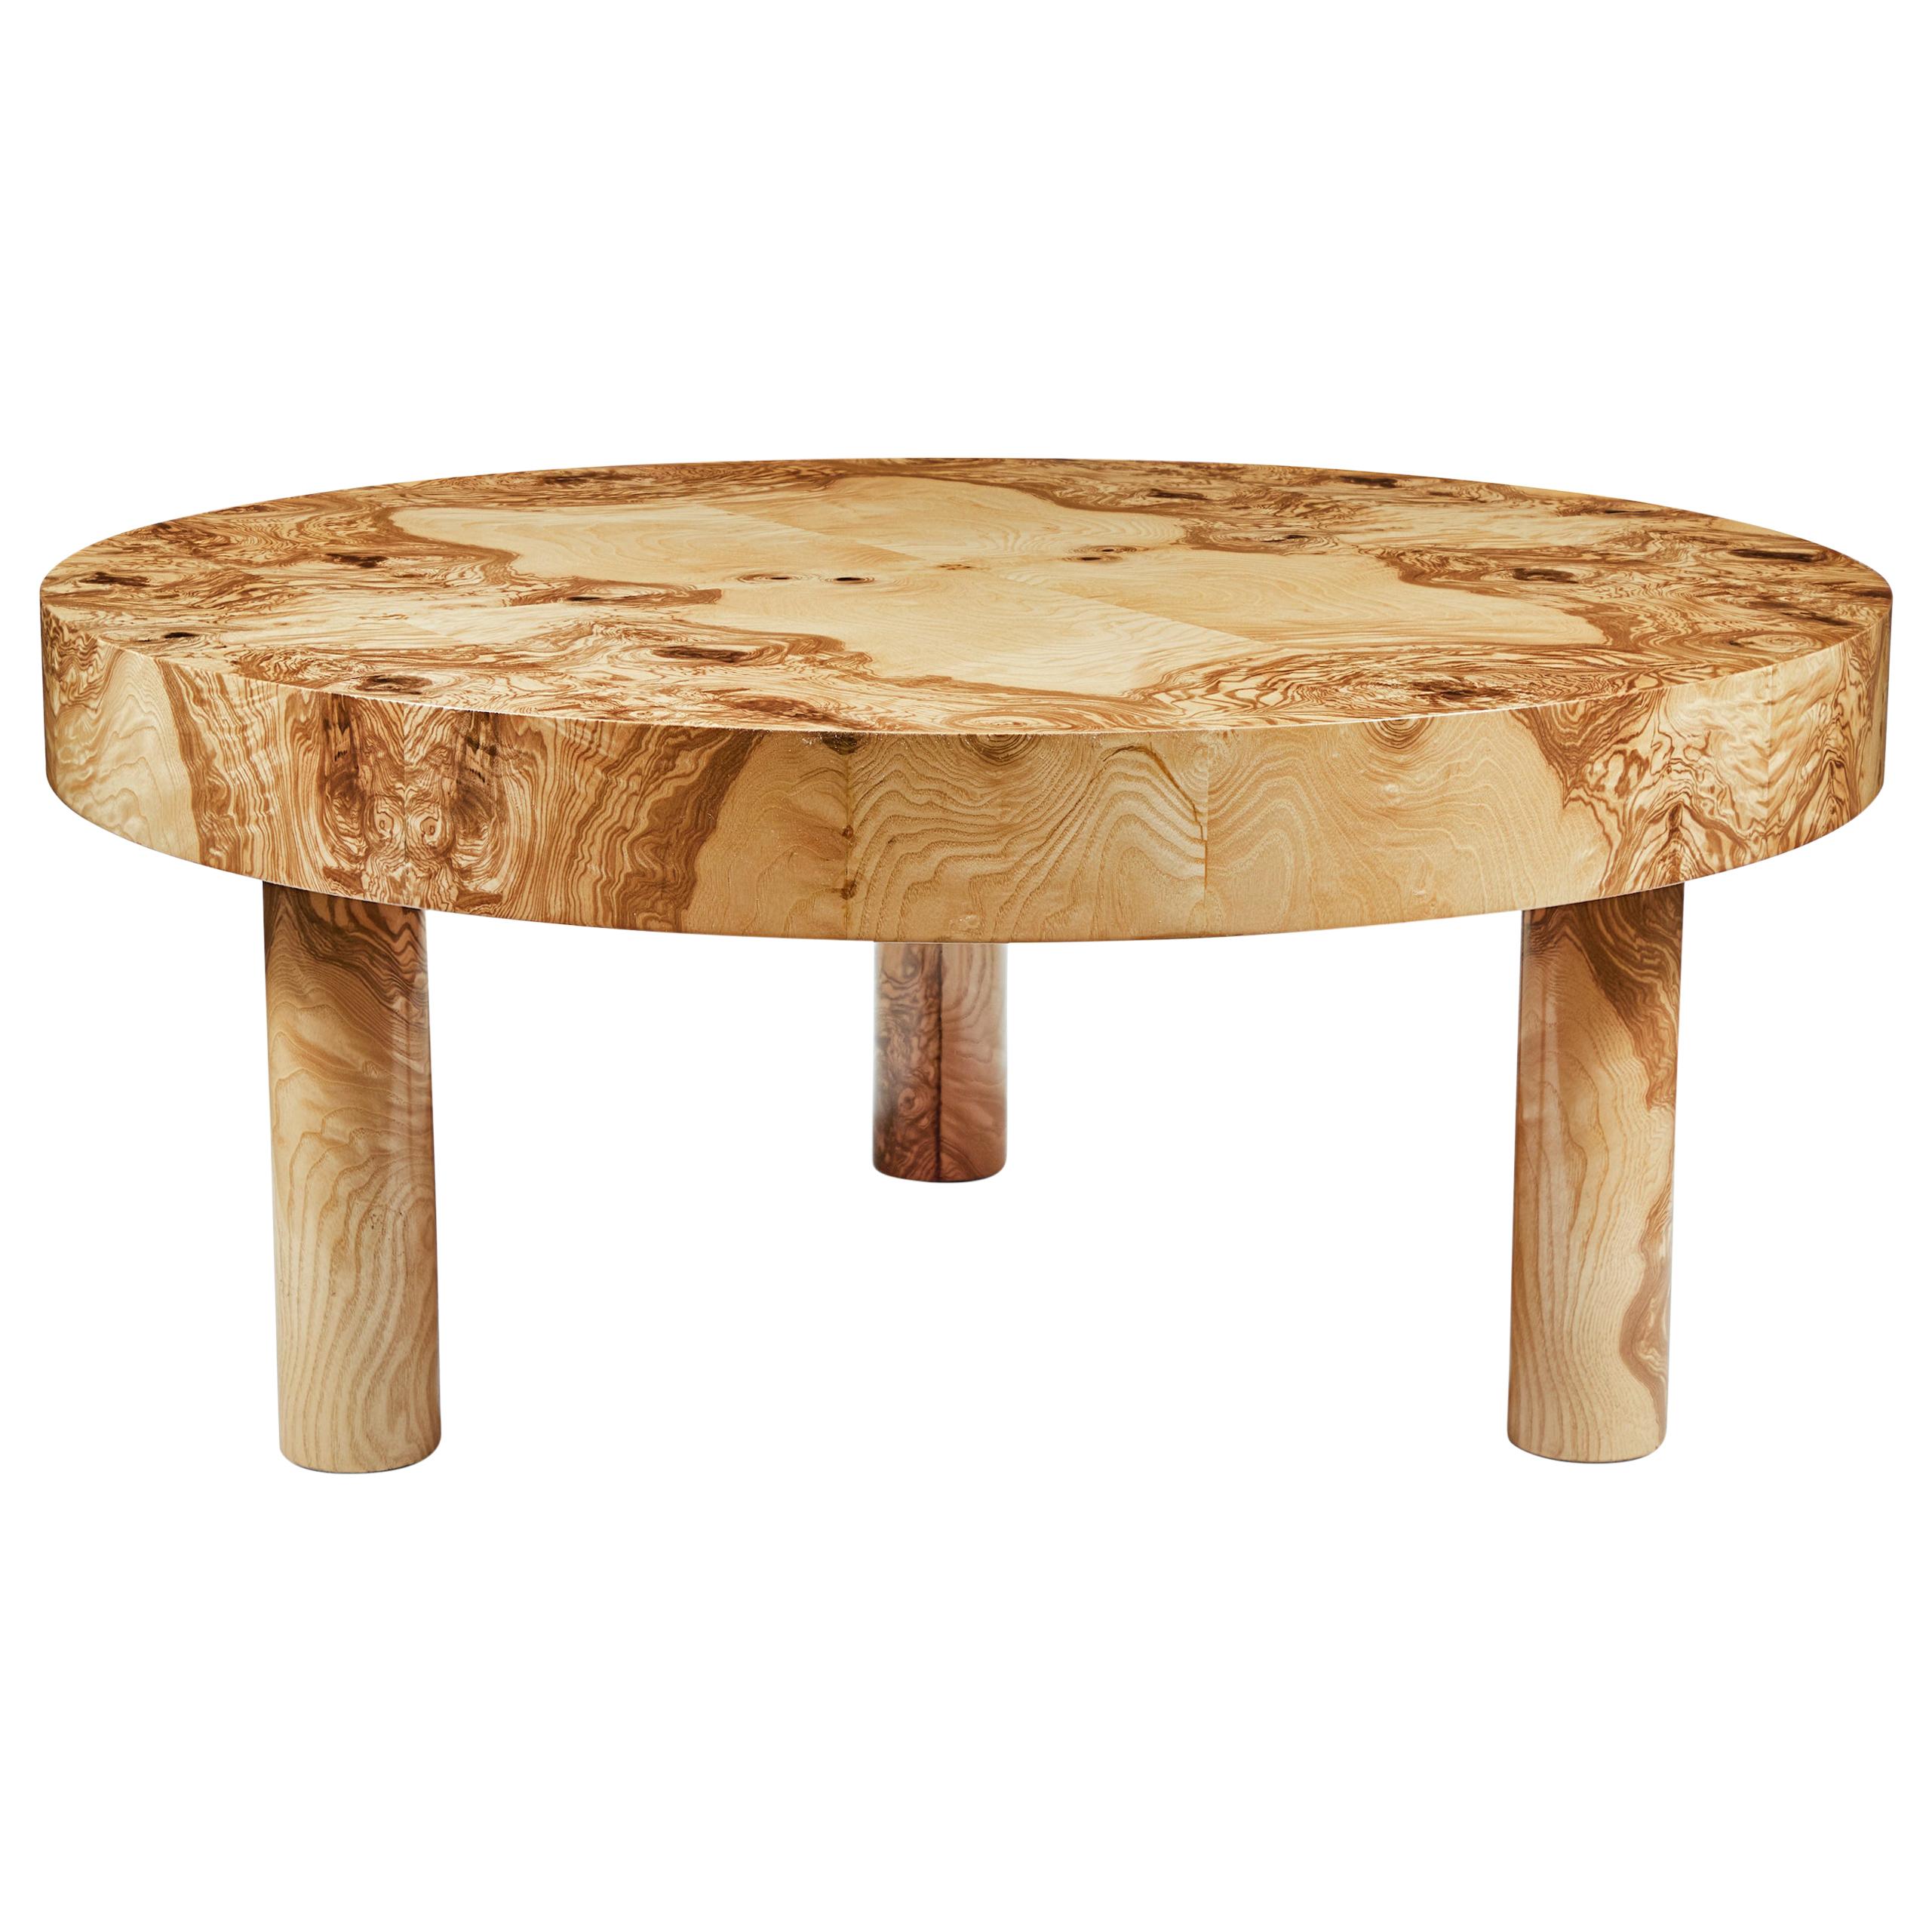 Carlton Coffee Table 36" DIA, in Natural Burl Wood, by August Abode For Sale